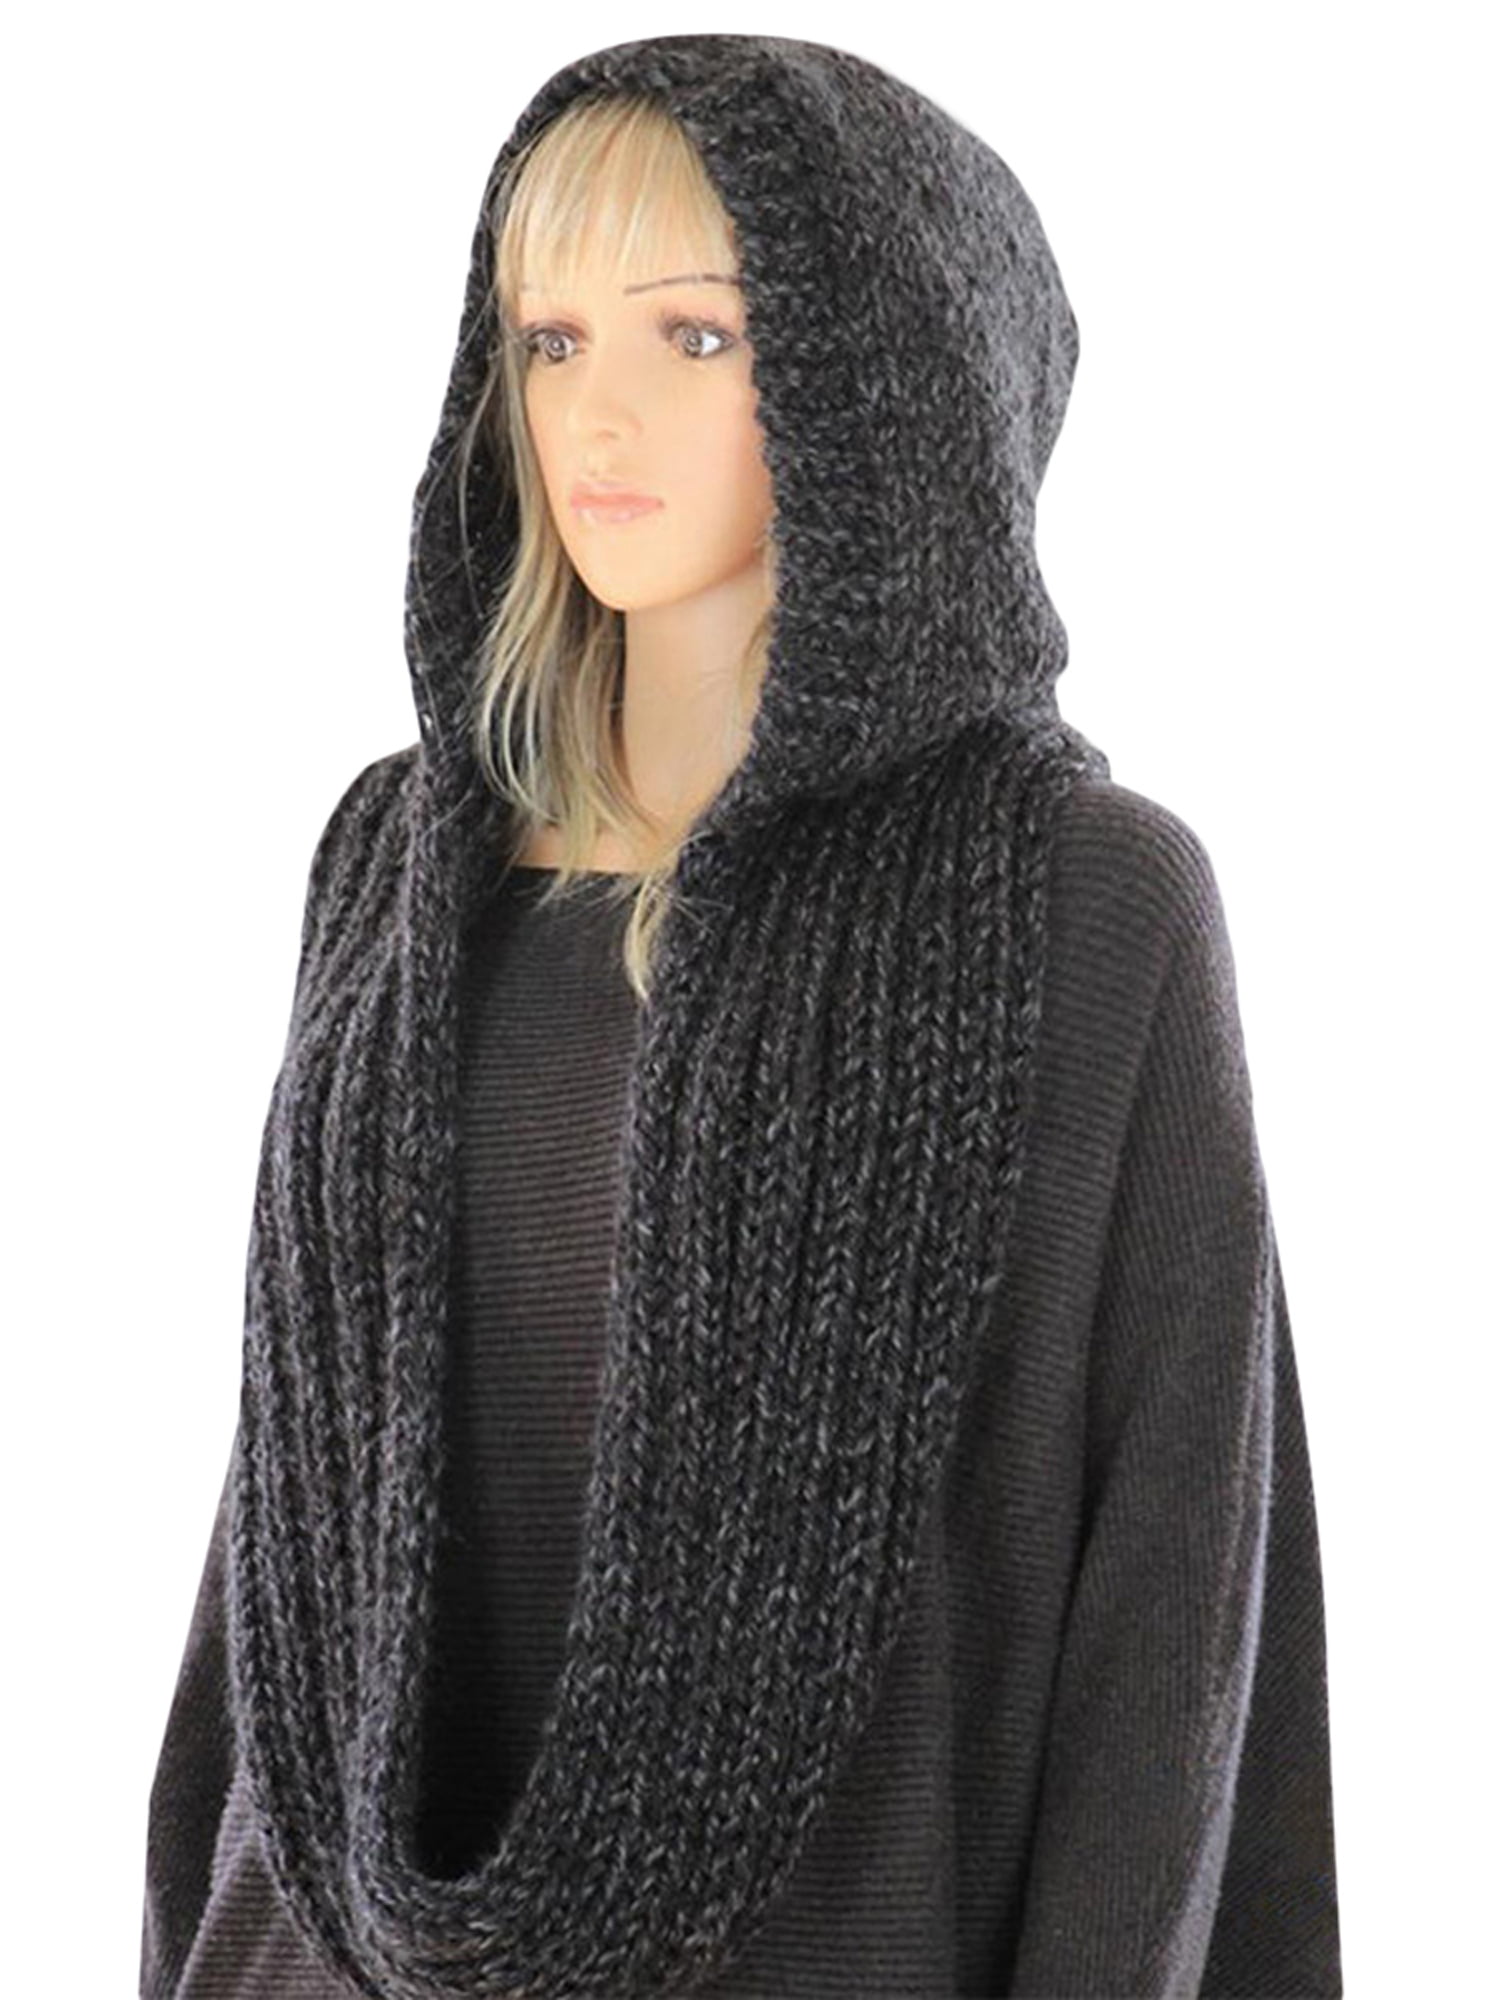 Thick Warm Winter Soft Knit Crochet Hood Infinity Scarf Pull String Faux Fur Hat 